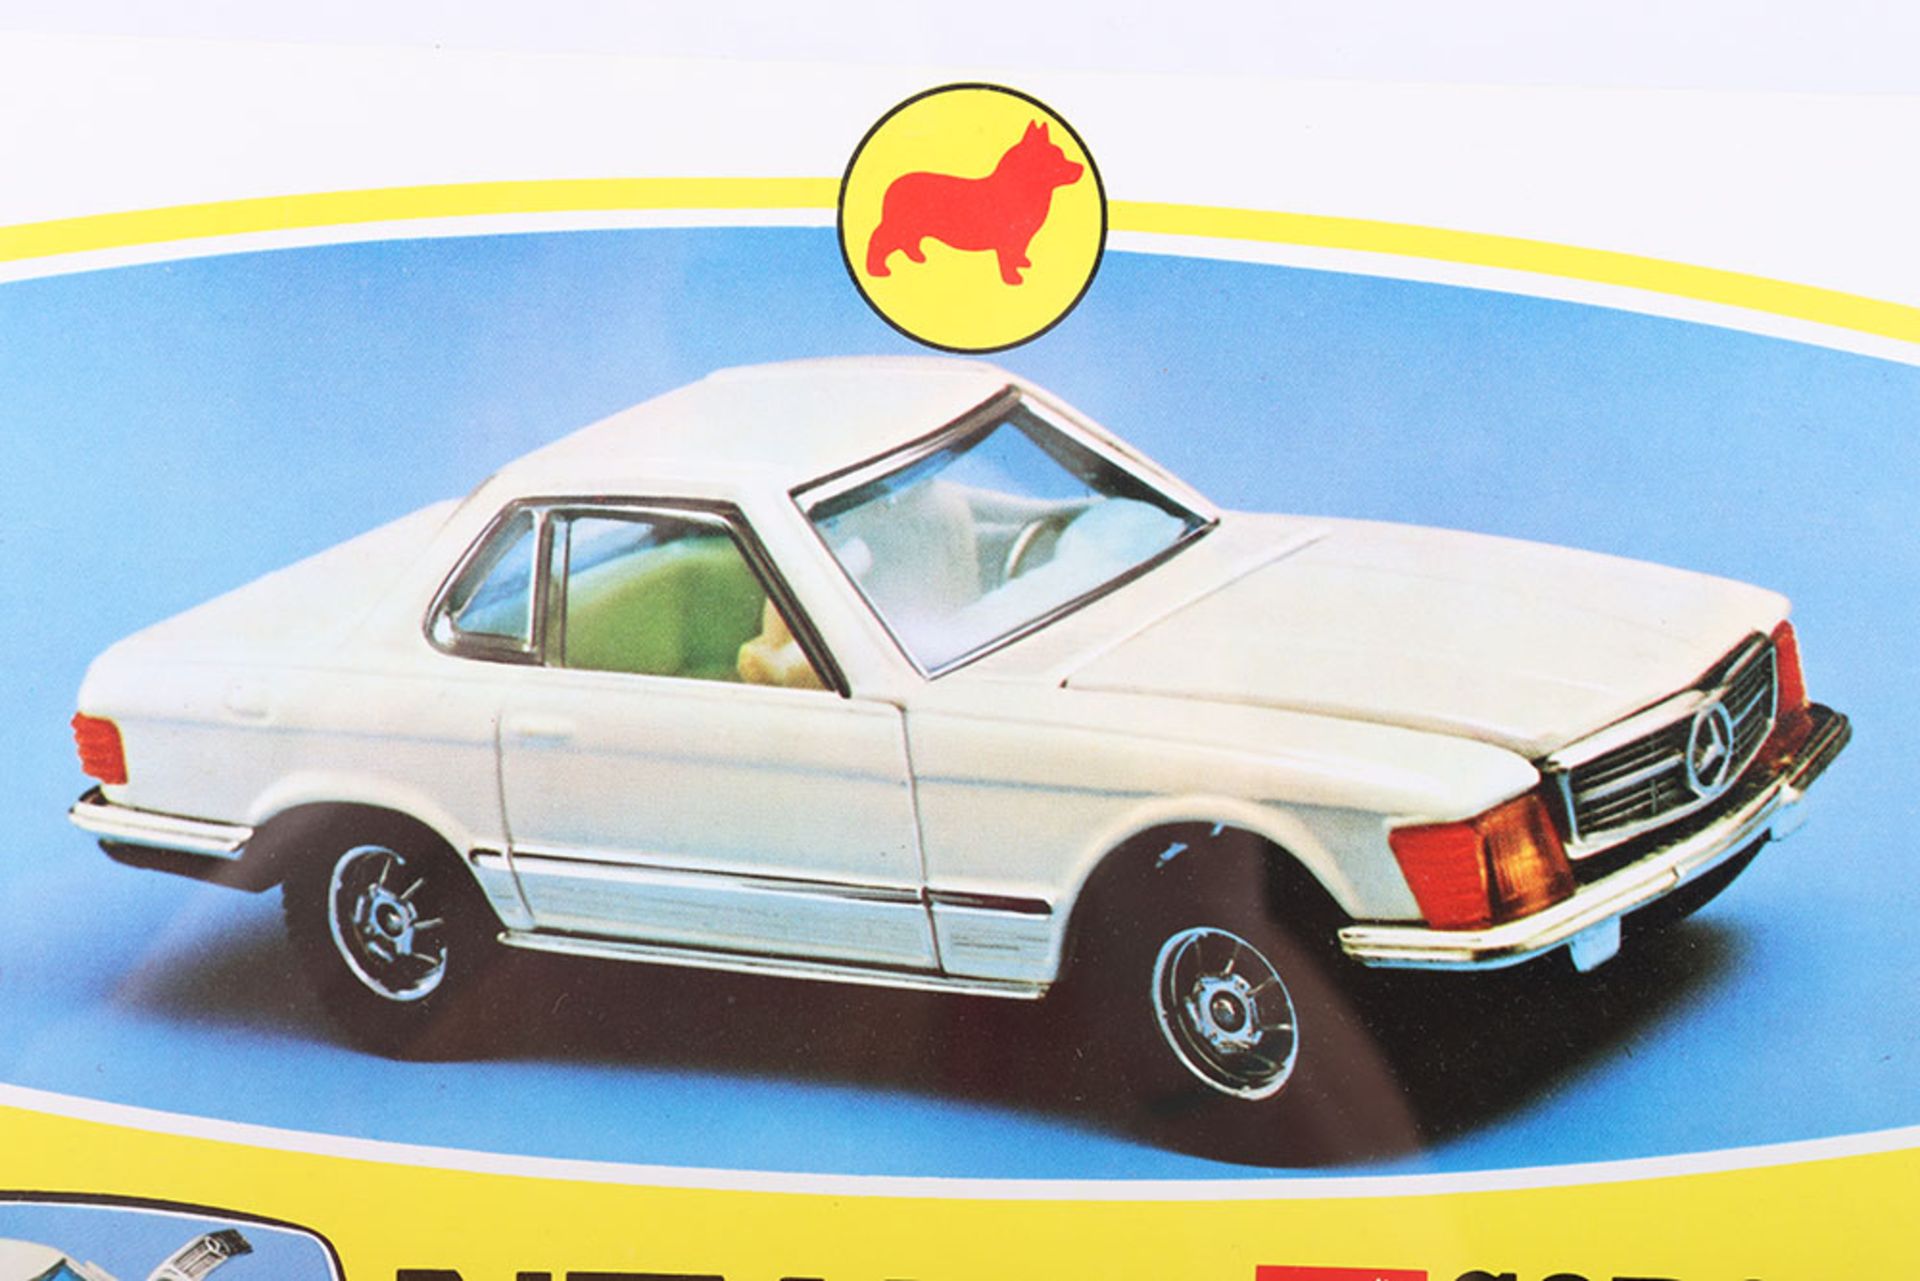 Original New from Corgi Toys 393 Mercedes Benz 350SL with Whizzwheels, Shop window poster - Image 3 of 5